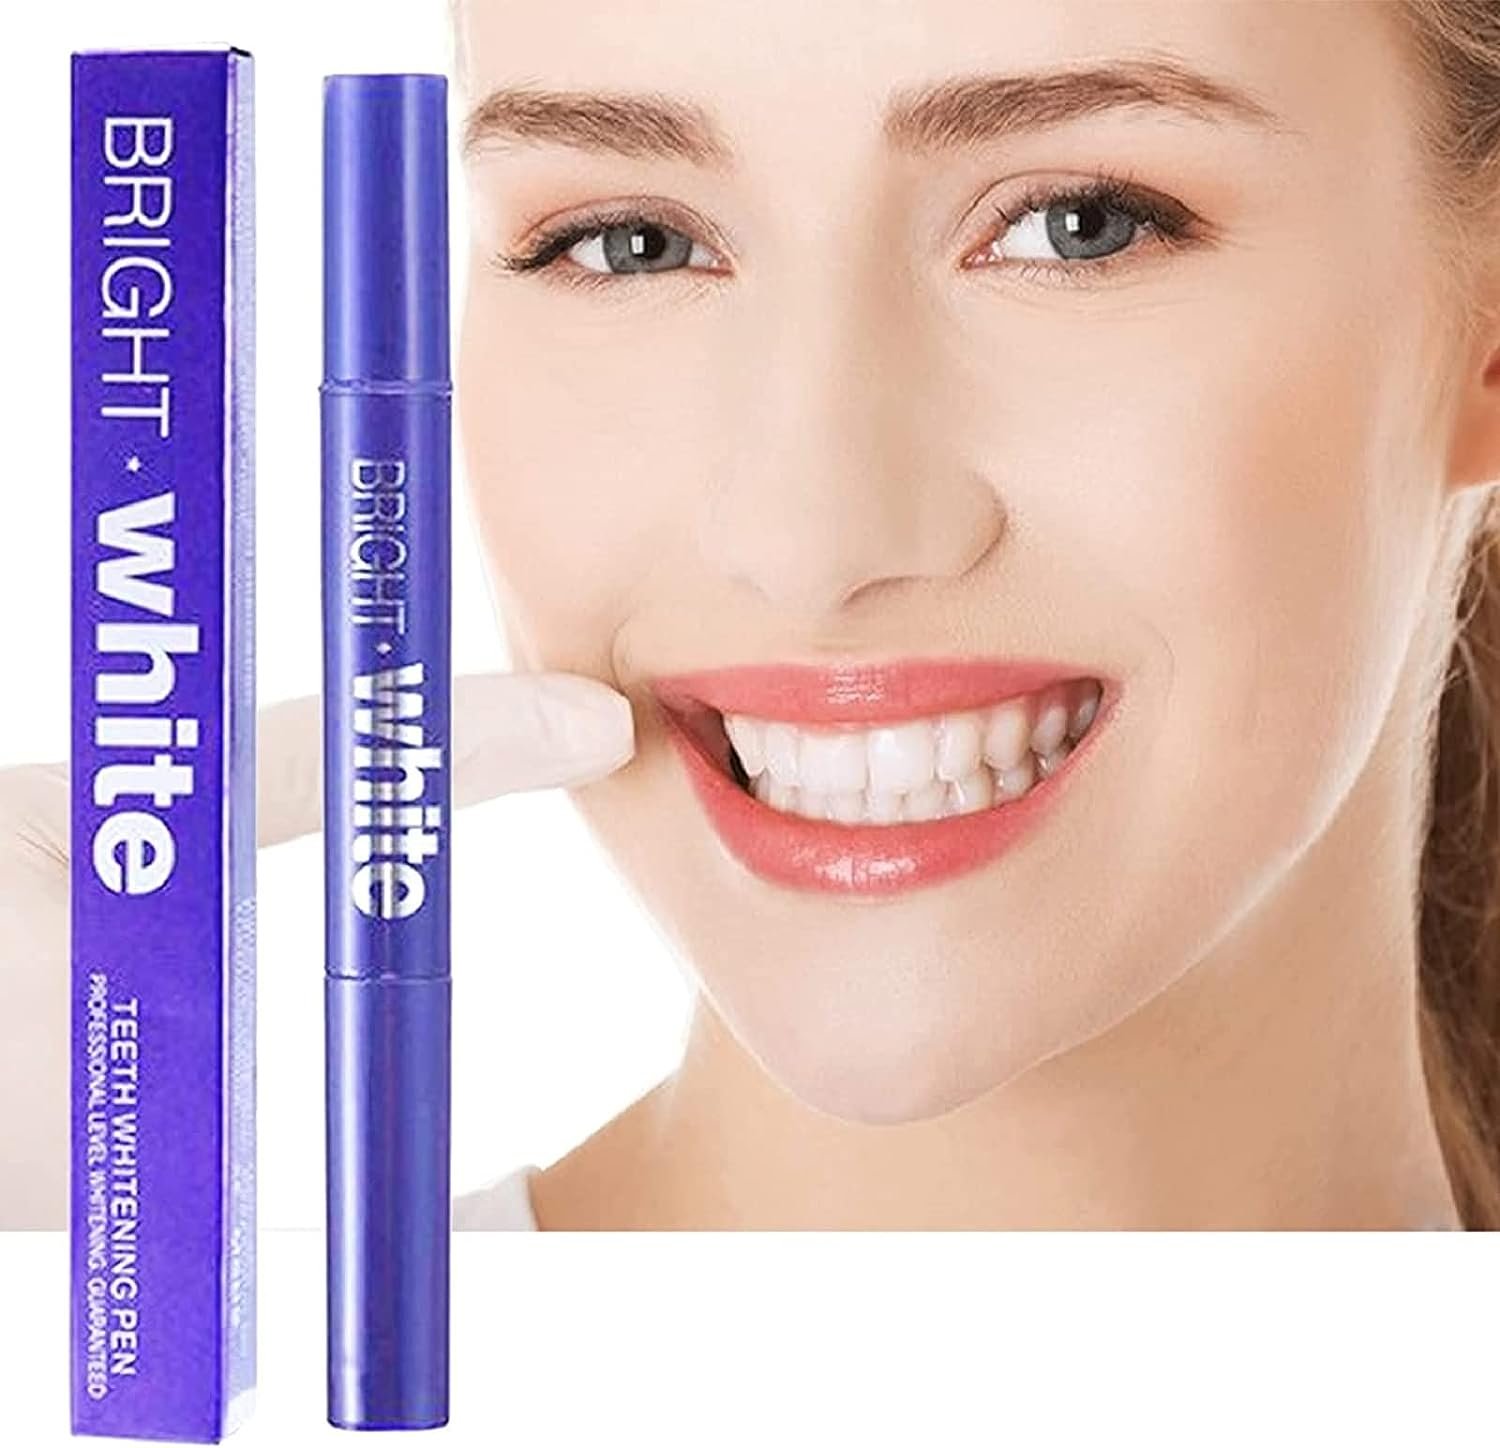 Teeth Whitening Pen, Effective＆Painless, No Sensitivity,Teeth Stain Remover to Whiten Teeth, Travel-Friendly, Easy to Use, Beautiful White SmileWhiten Teeth, Become More Confident and Attractive